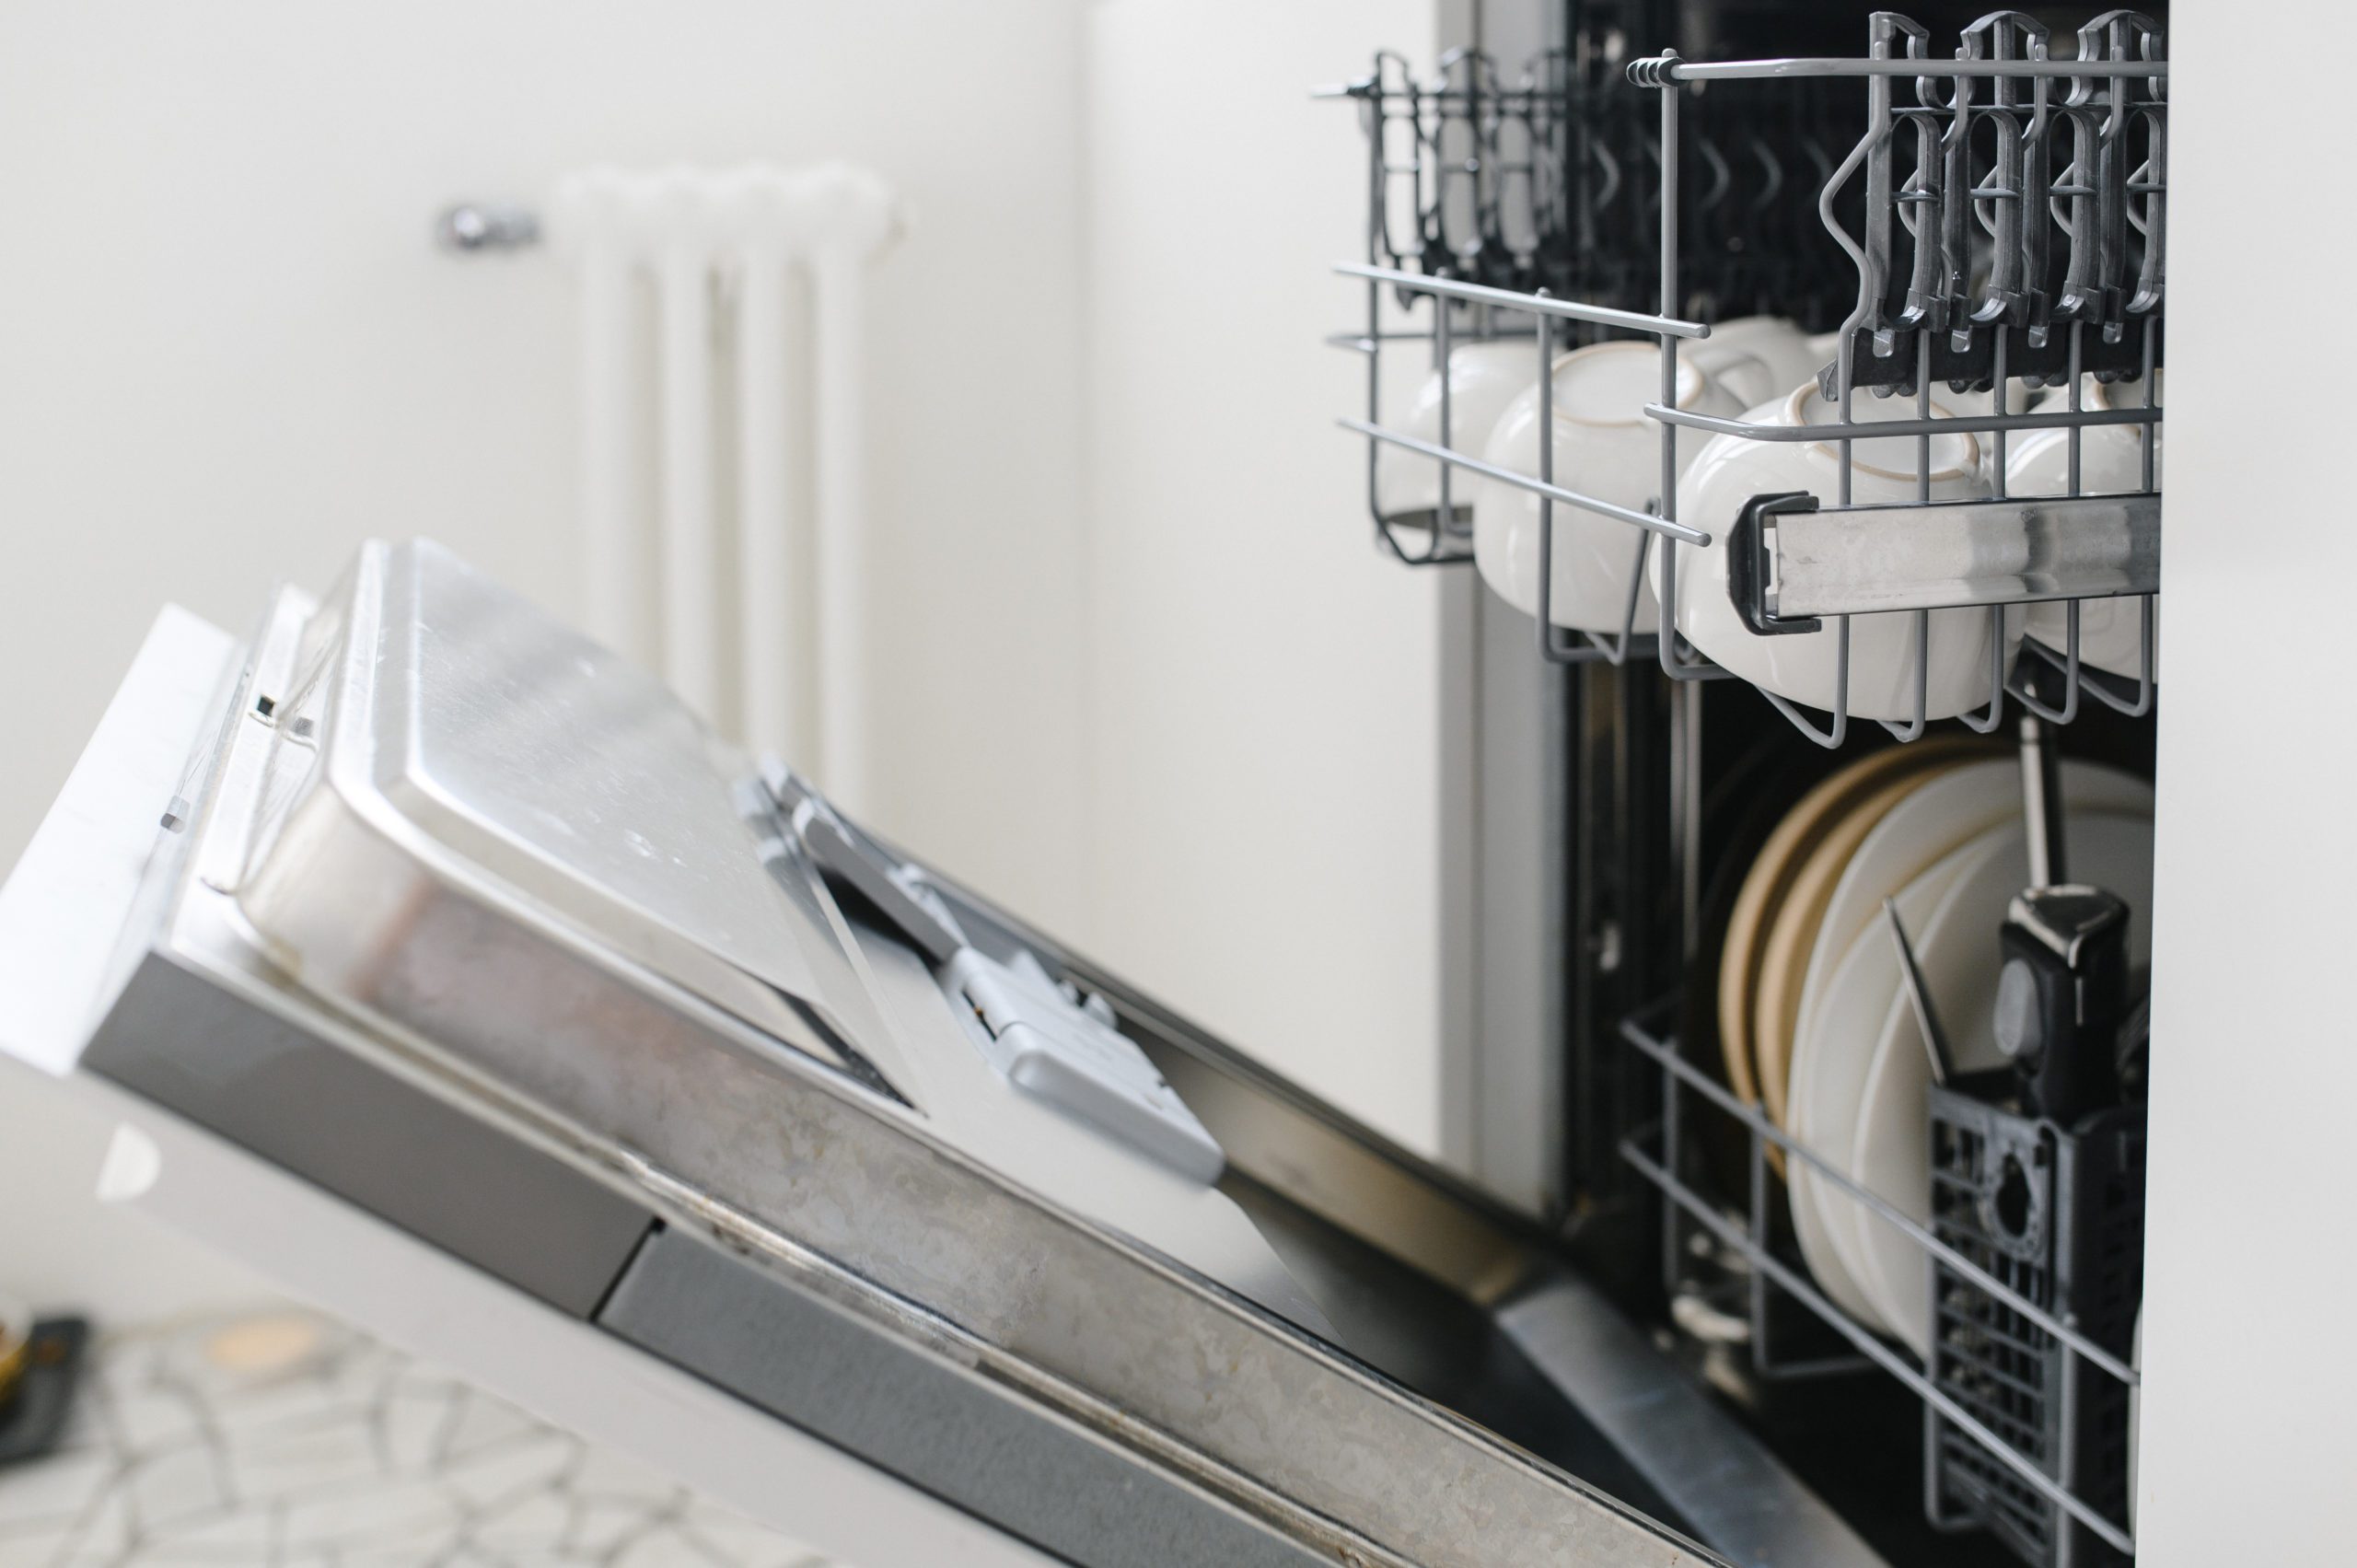 Is a Drawer Dishwasher Worth It? Pros and Cons from a Plumber 